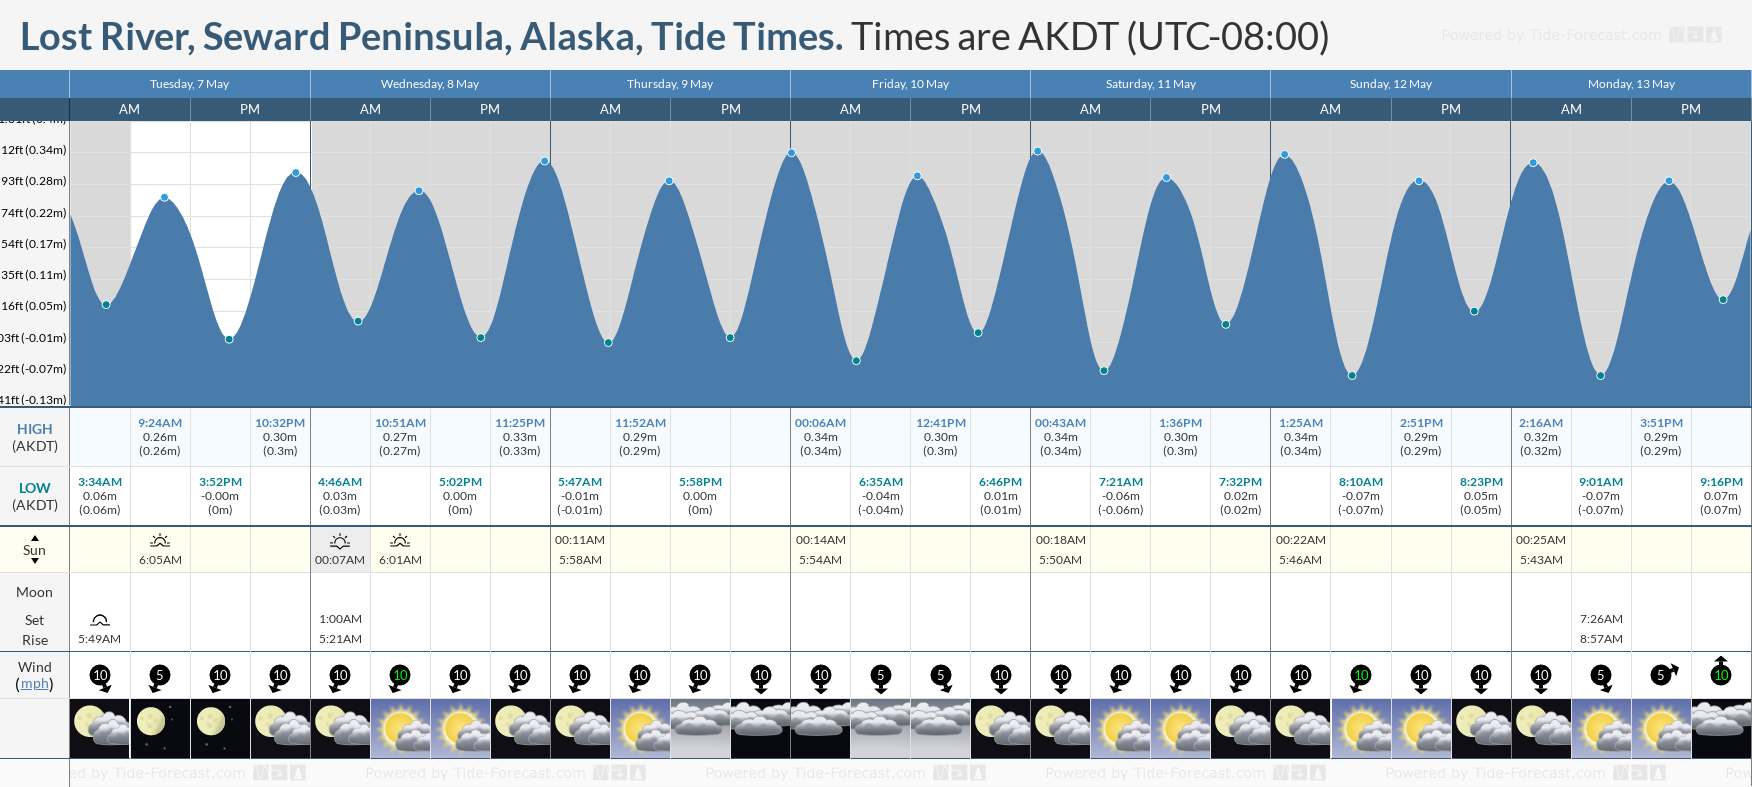 Lost River, Seward Peninsula, Alaska Tide Chart including high and low tide times for the next 7 days